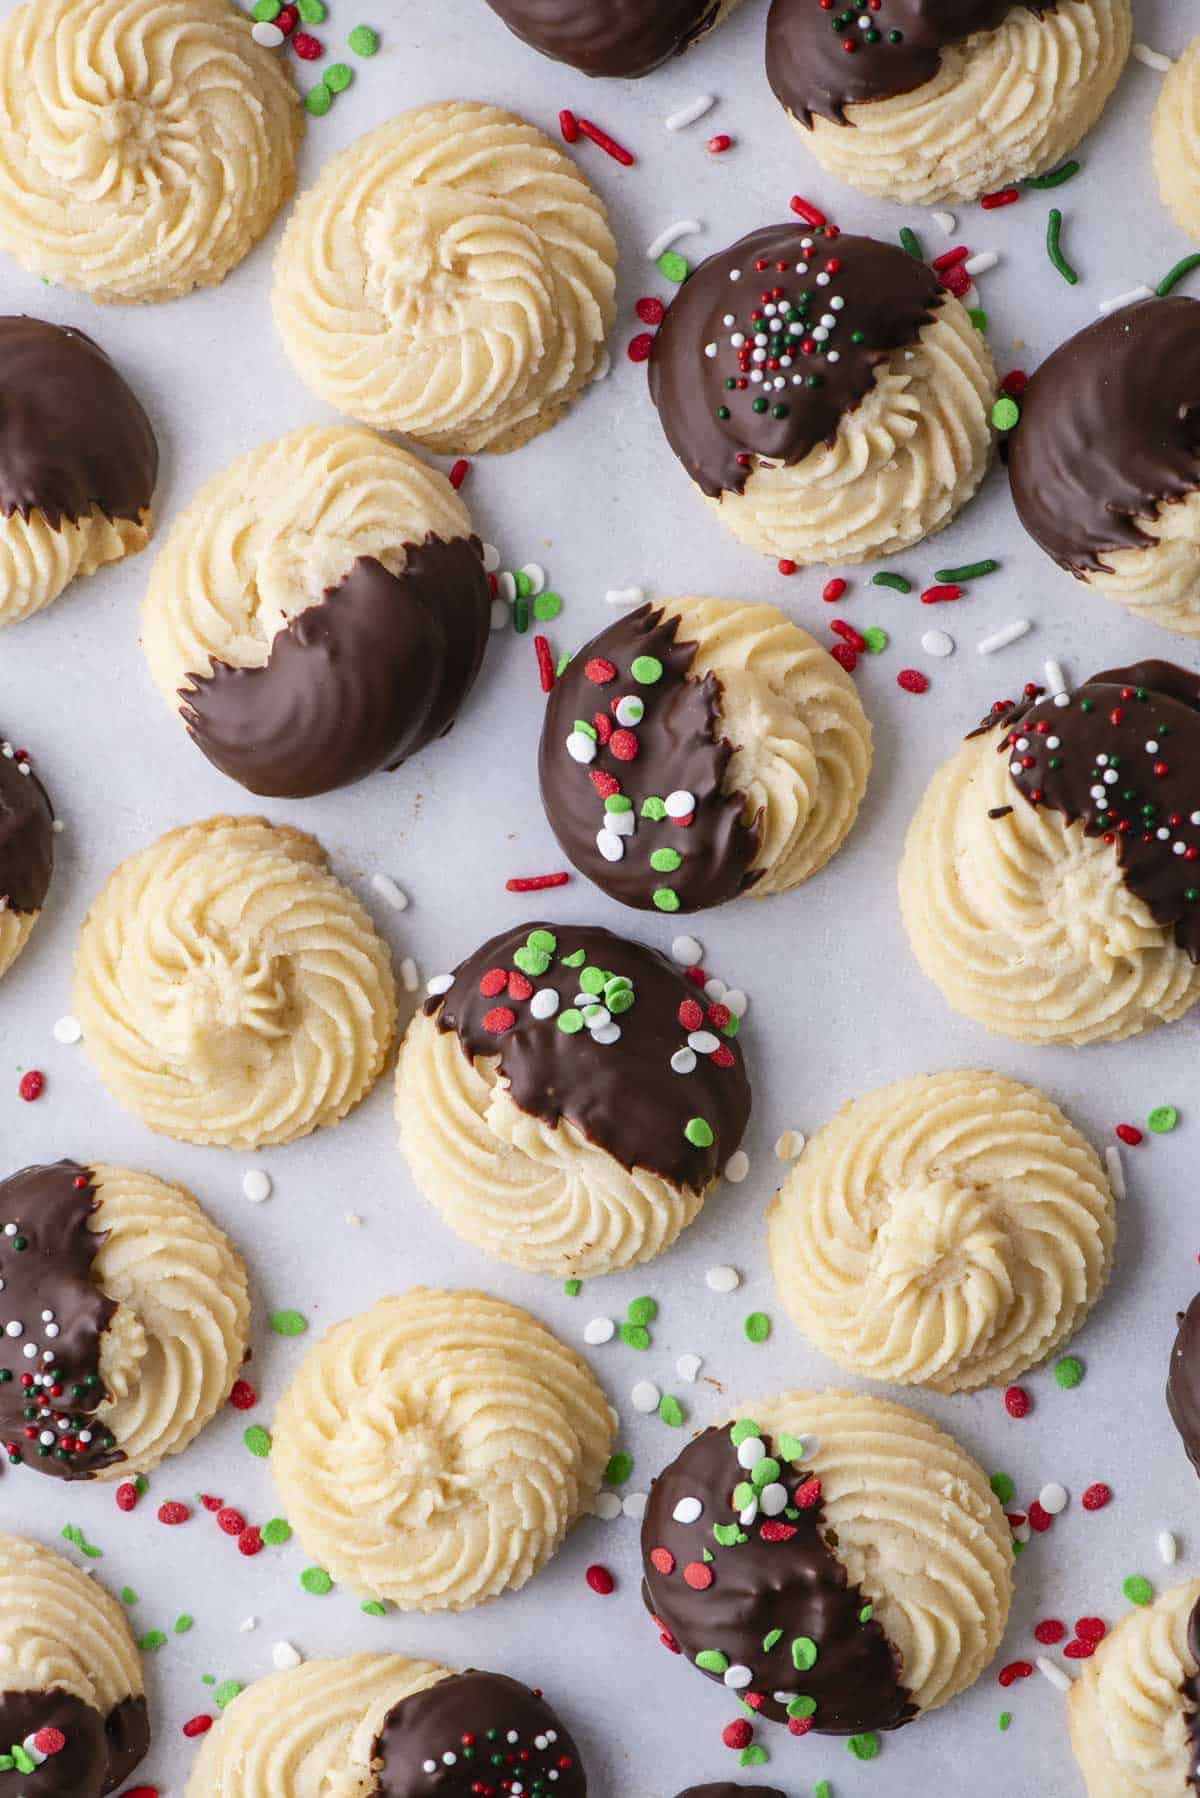 An assortment of butter cookies lined in rows on parchment paper, some plain cookies, some dipped in chocolate and some dipped in chocolate with red, green and white sprinkles, with sprinkles scattered around between the cookies